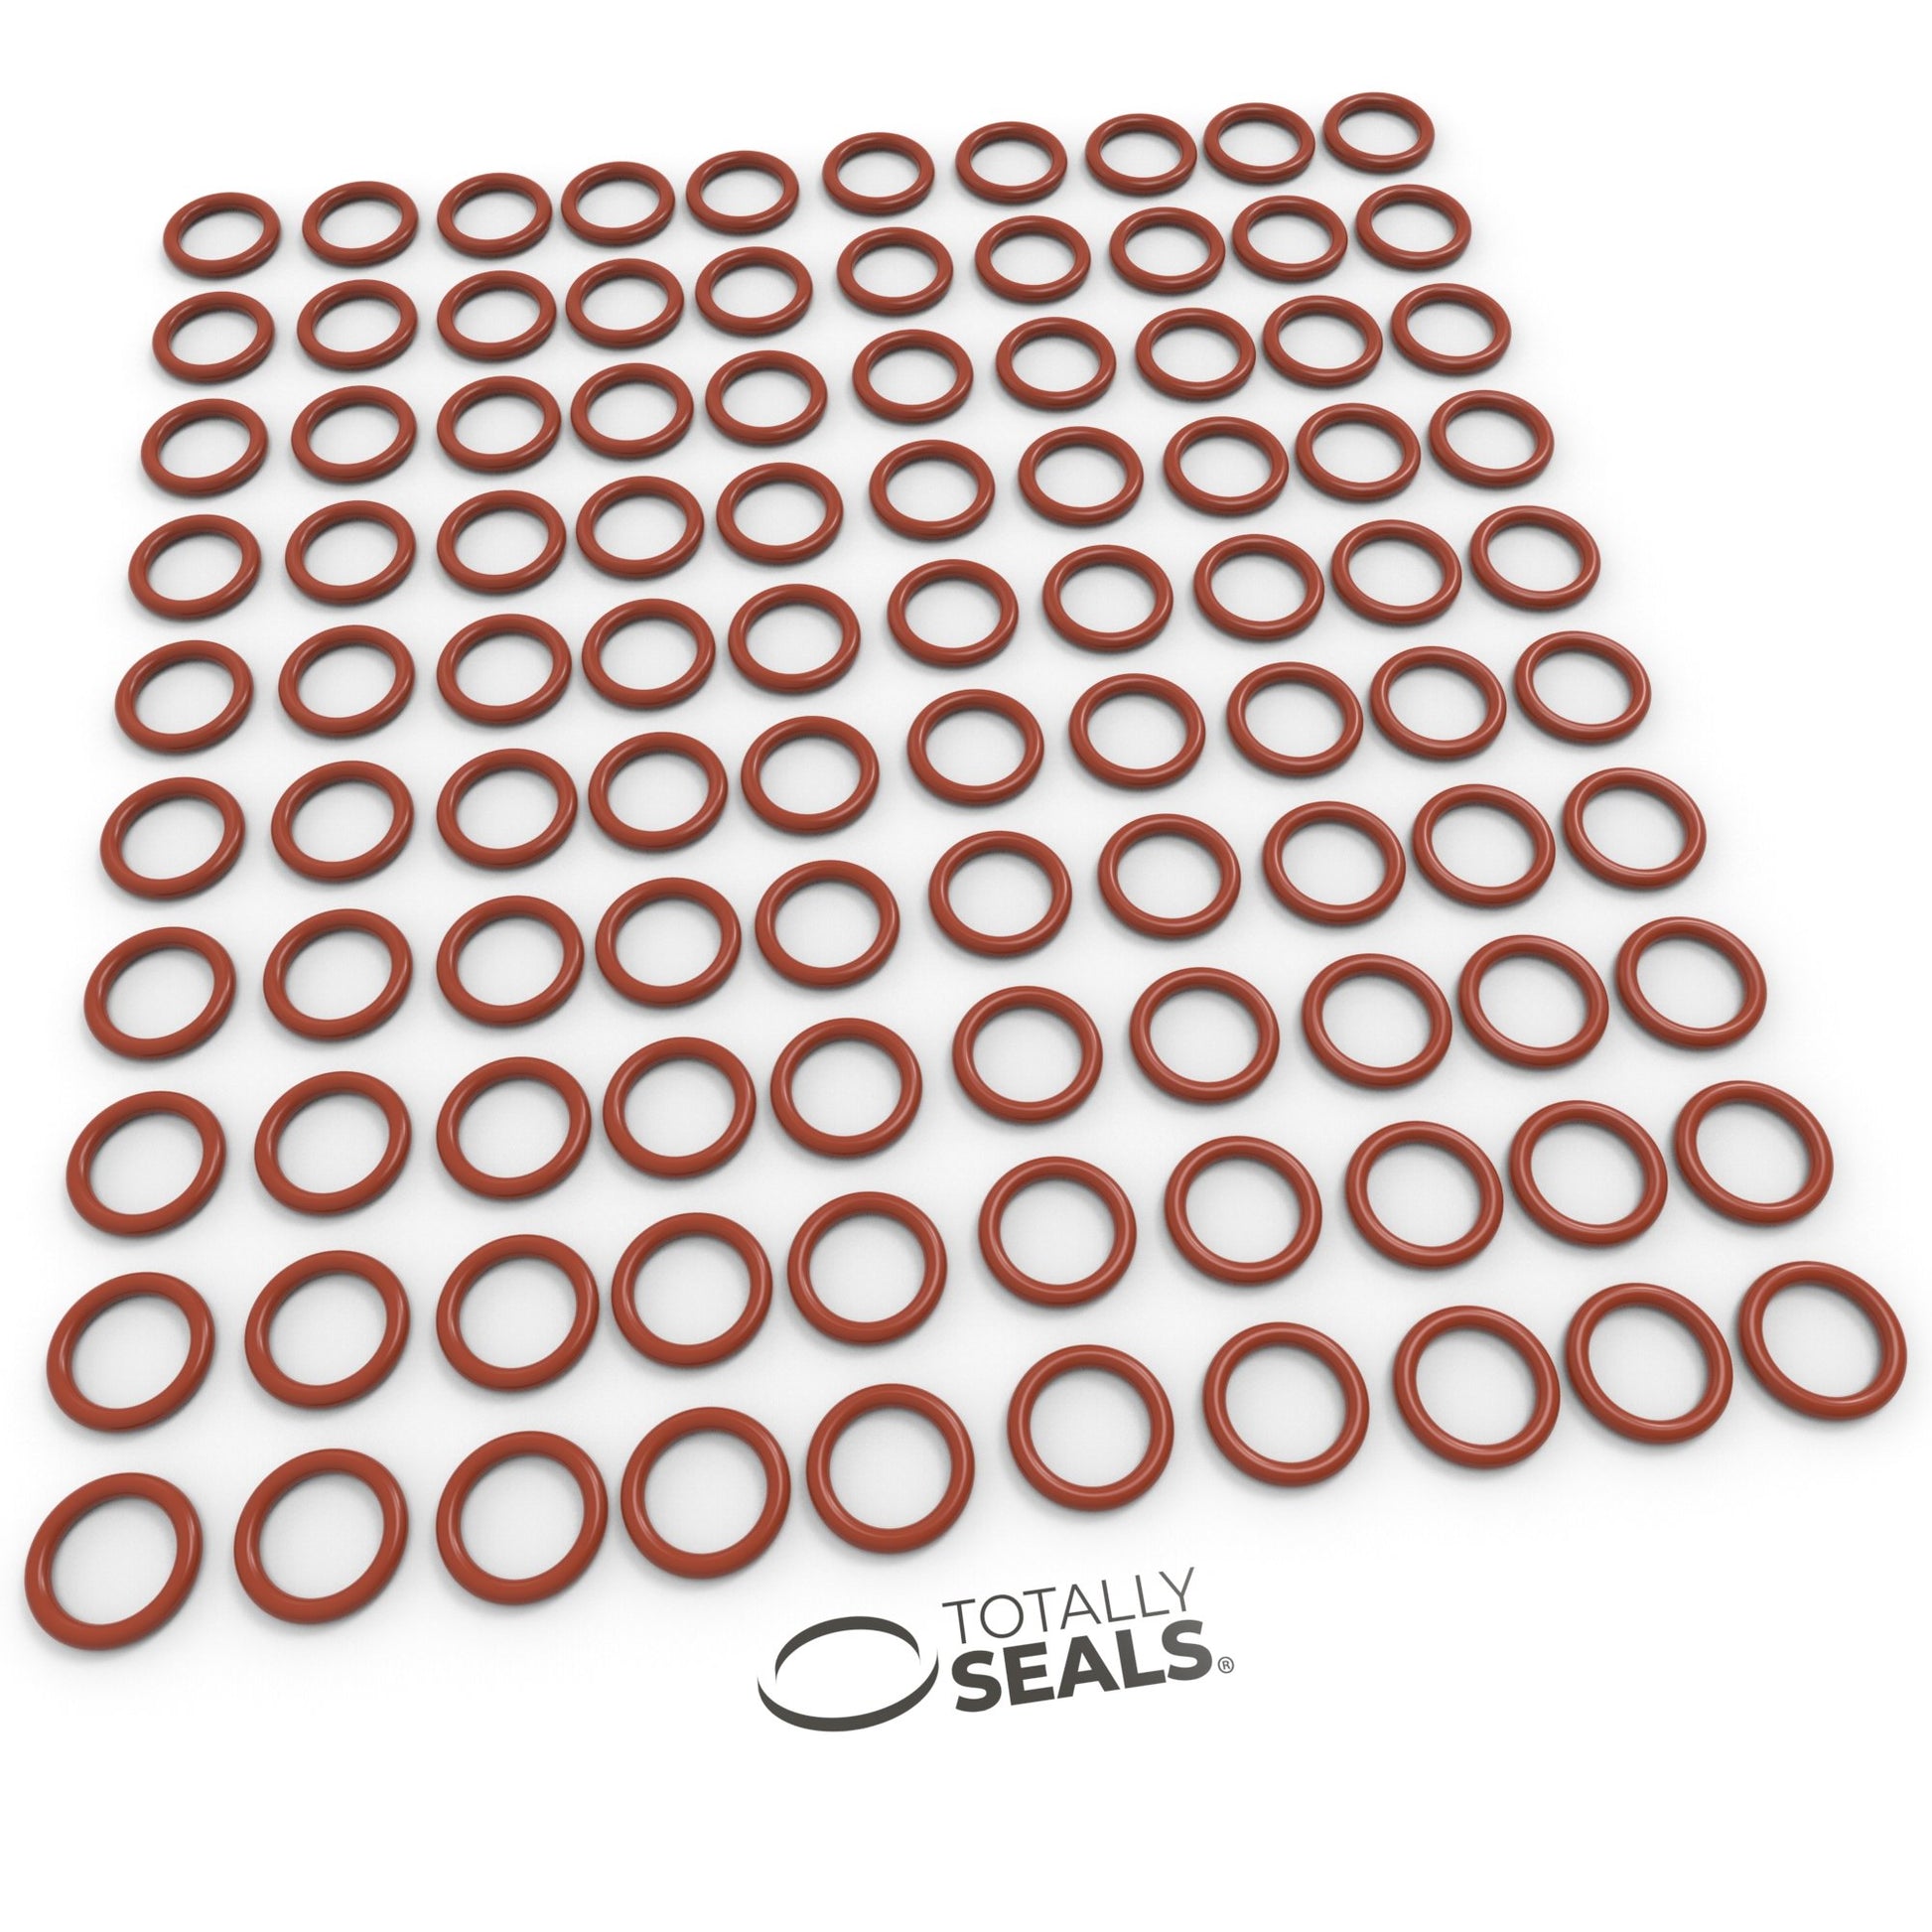 17mm x 3mm (23mm OD) Silicone O-Rings - Totally Seals®